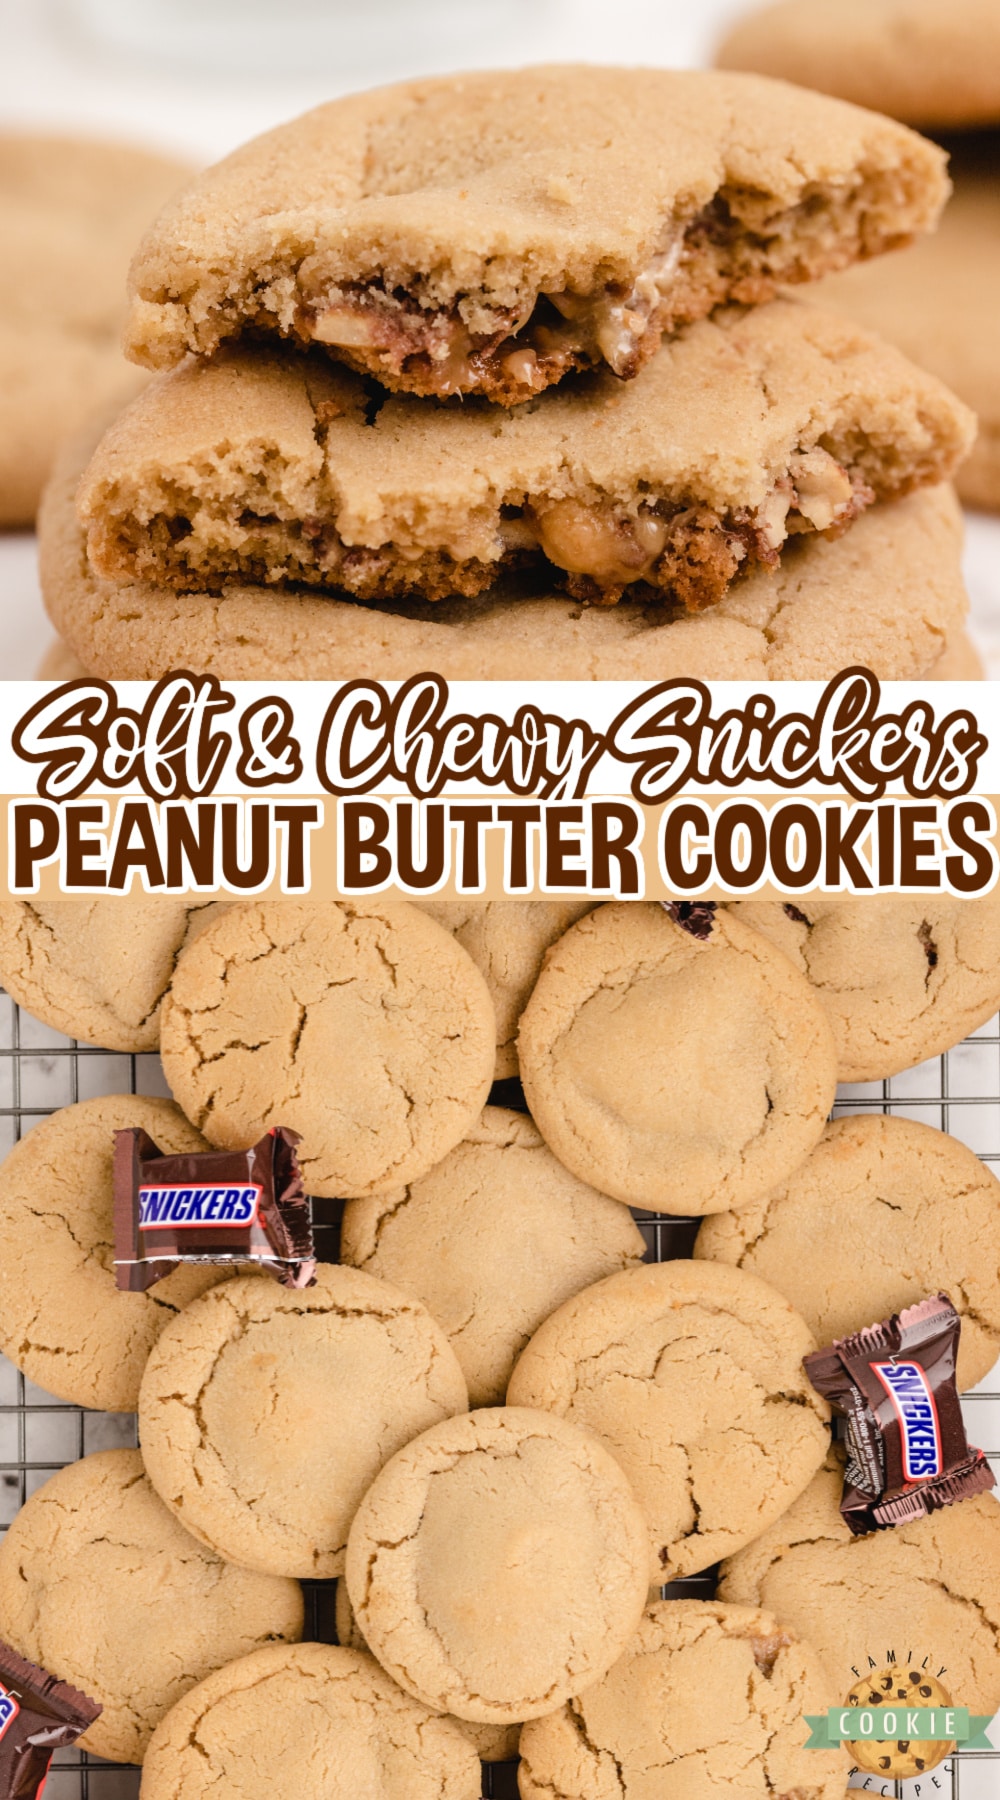 Snickers Peanut Butter Cookies start with an incredible soft and delicious peanut butter cookie recipe, and add a Snickers surprise in the middle!